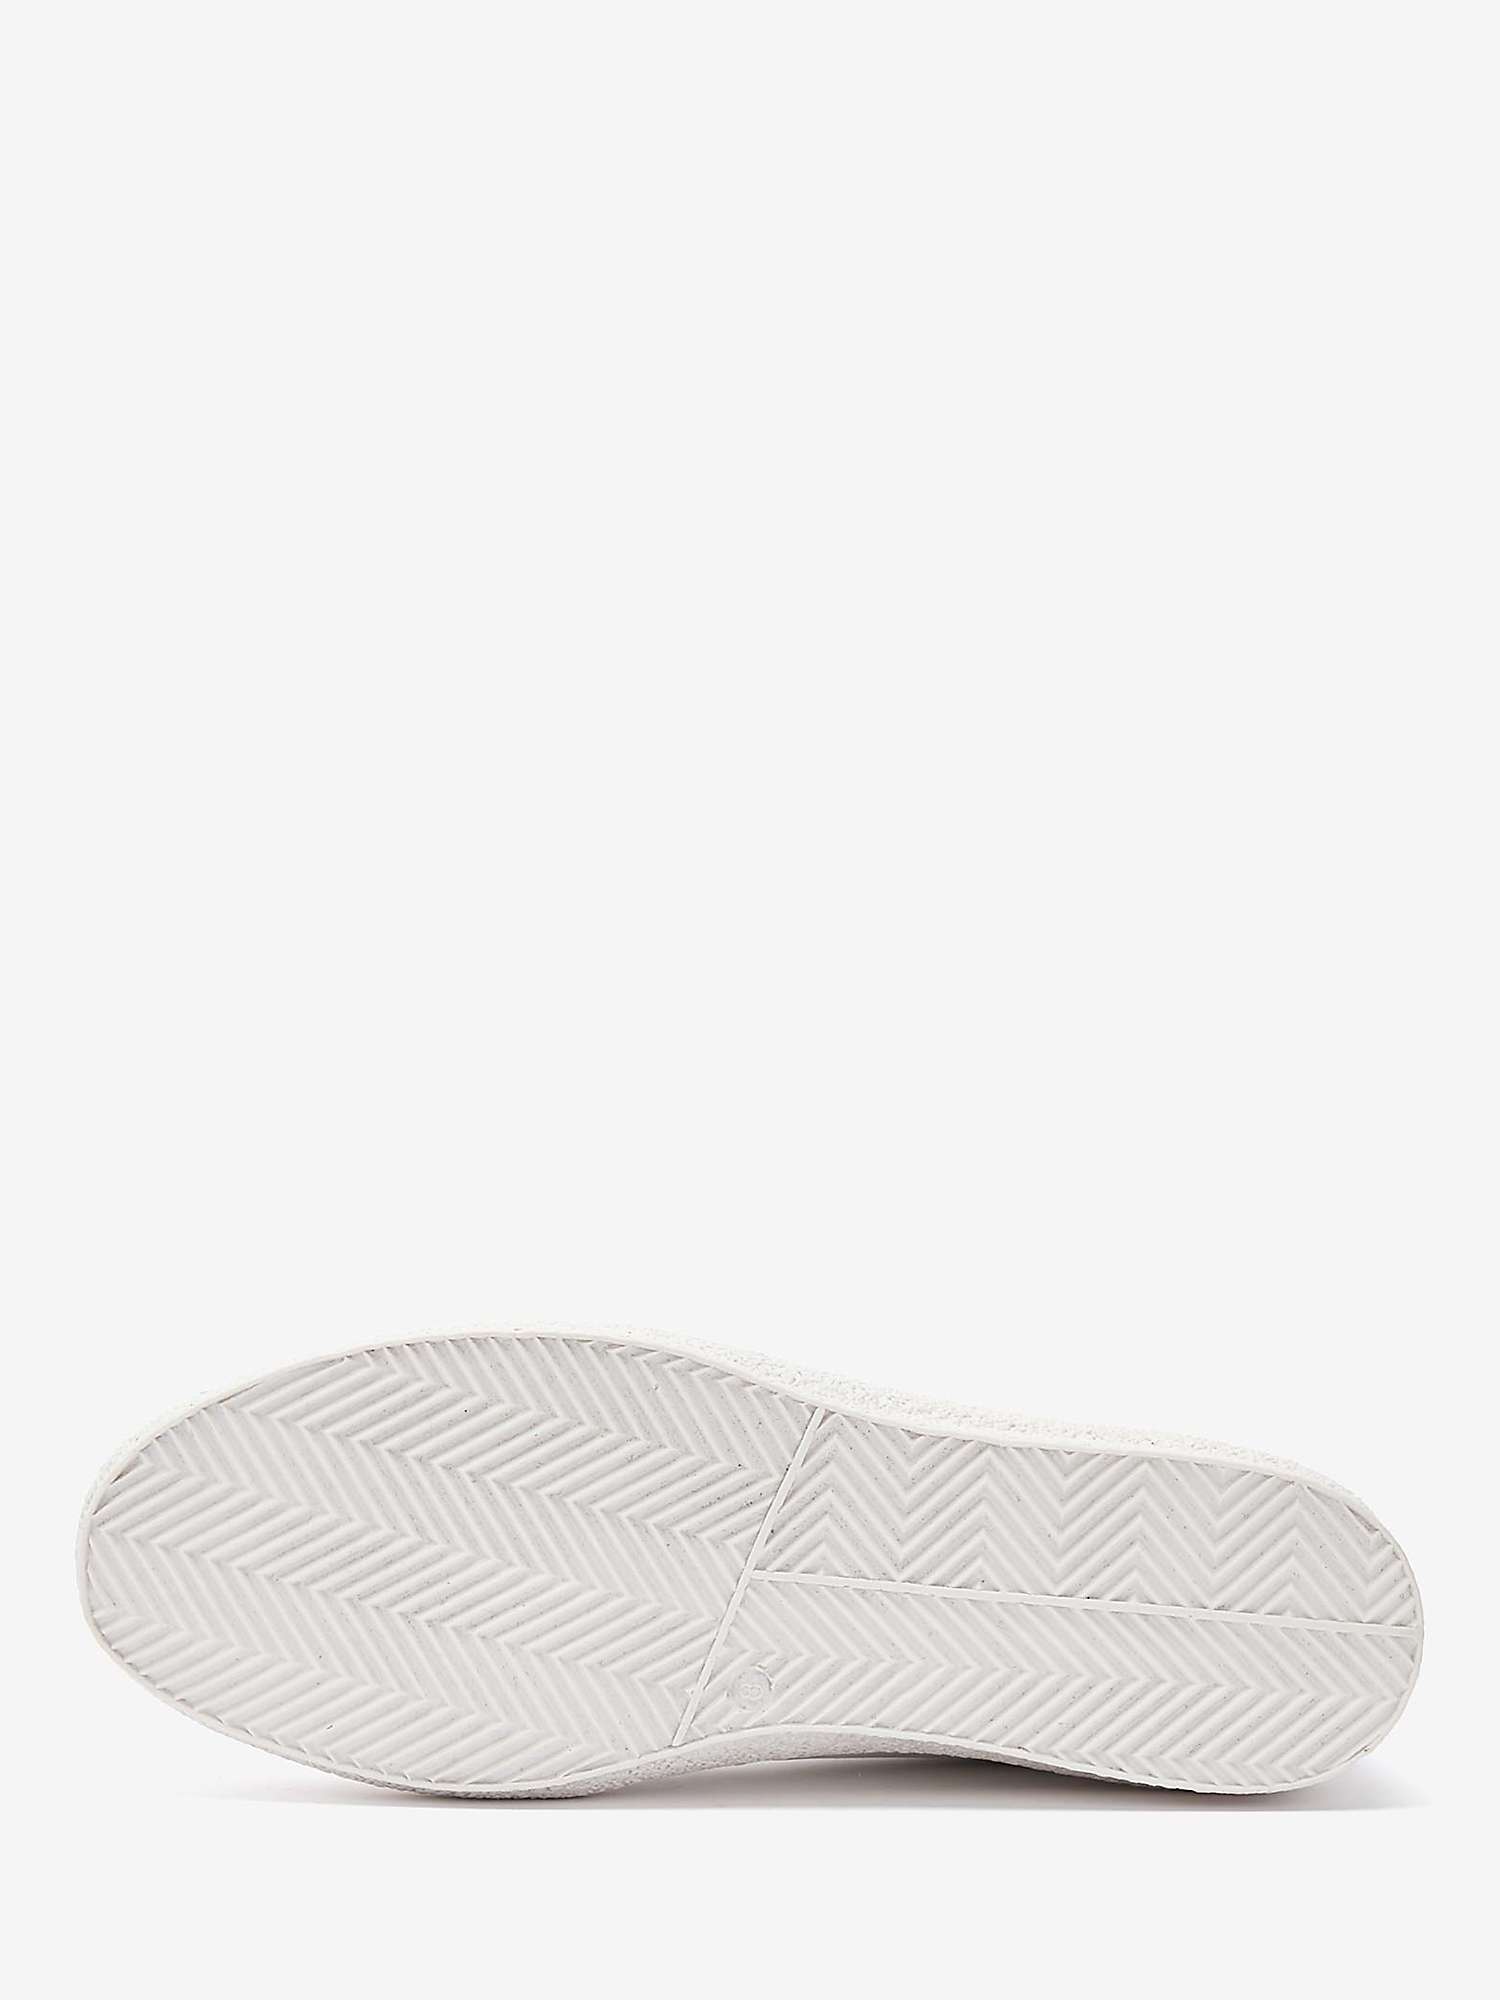 Buy Barbour International Felix Trainers, White Online at johnlewis.com